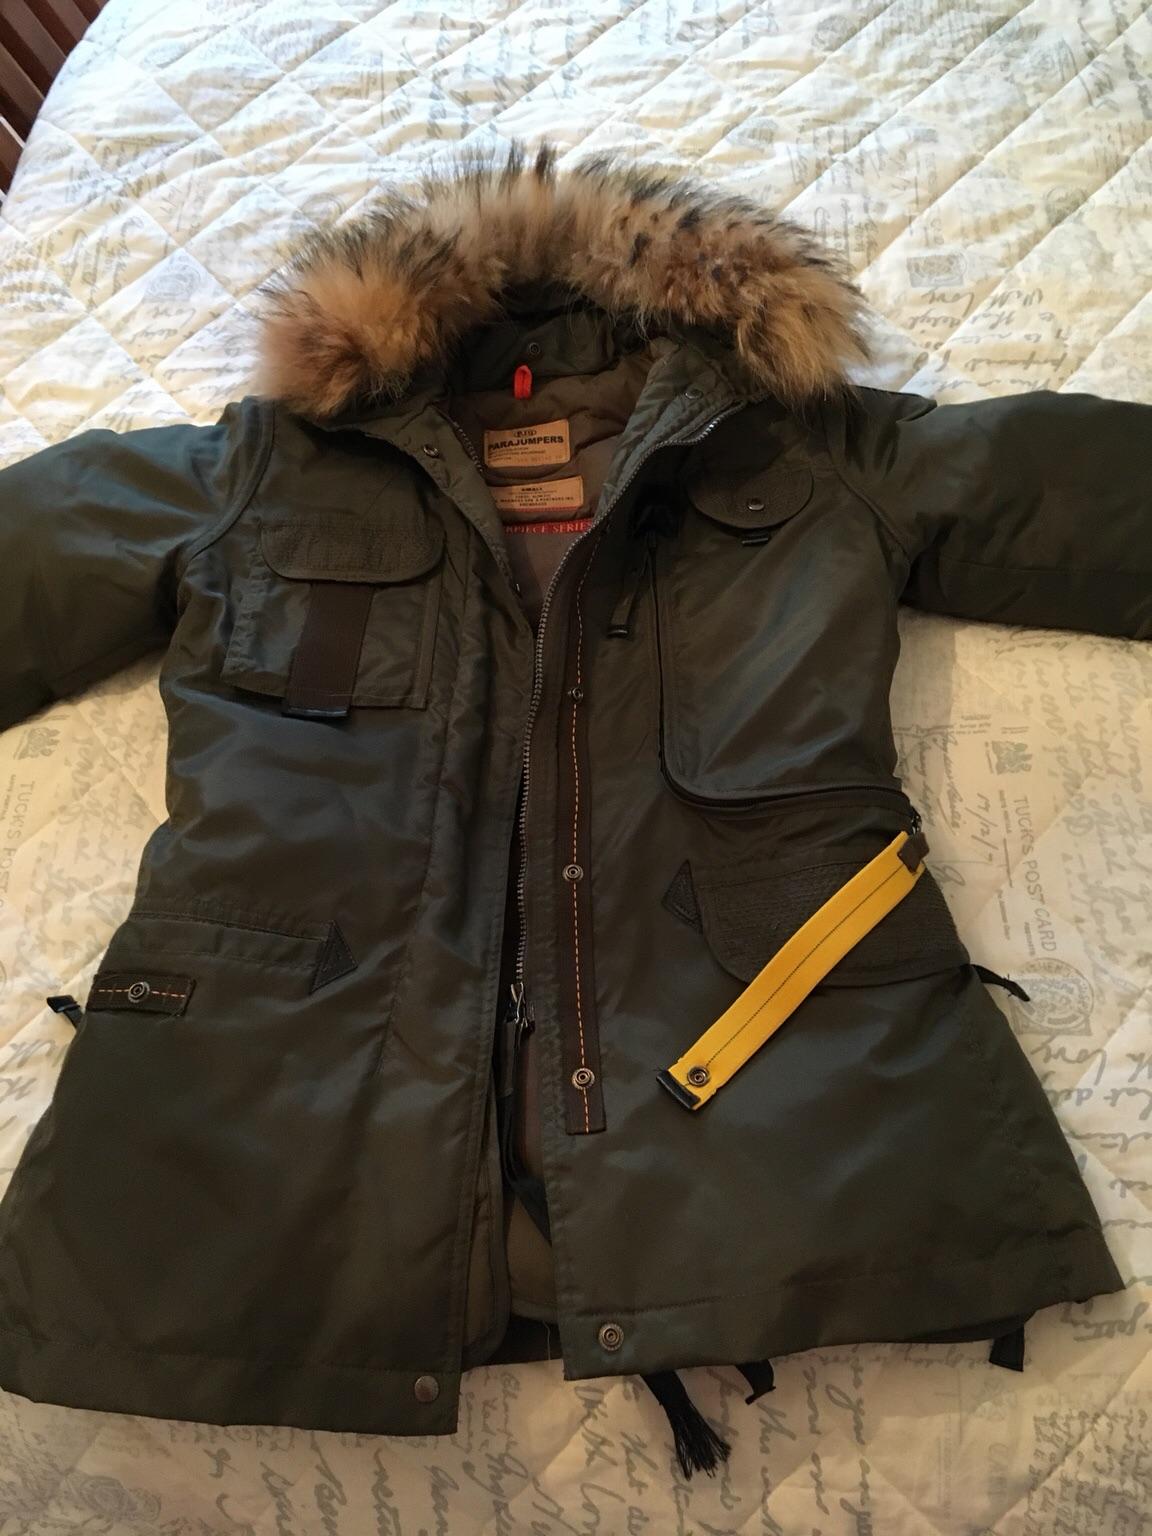 Parajumpers replica jacket in LS7 Leeds for £100.00 for sale | Shpock